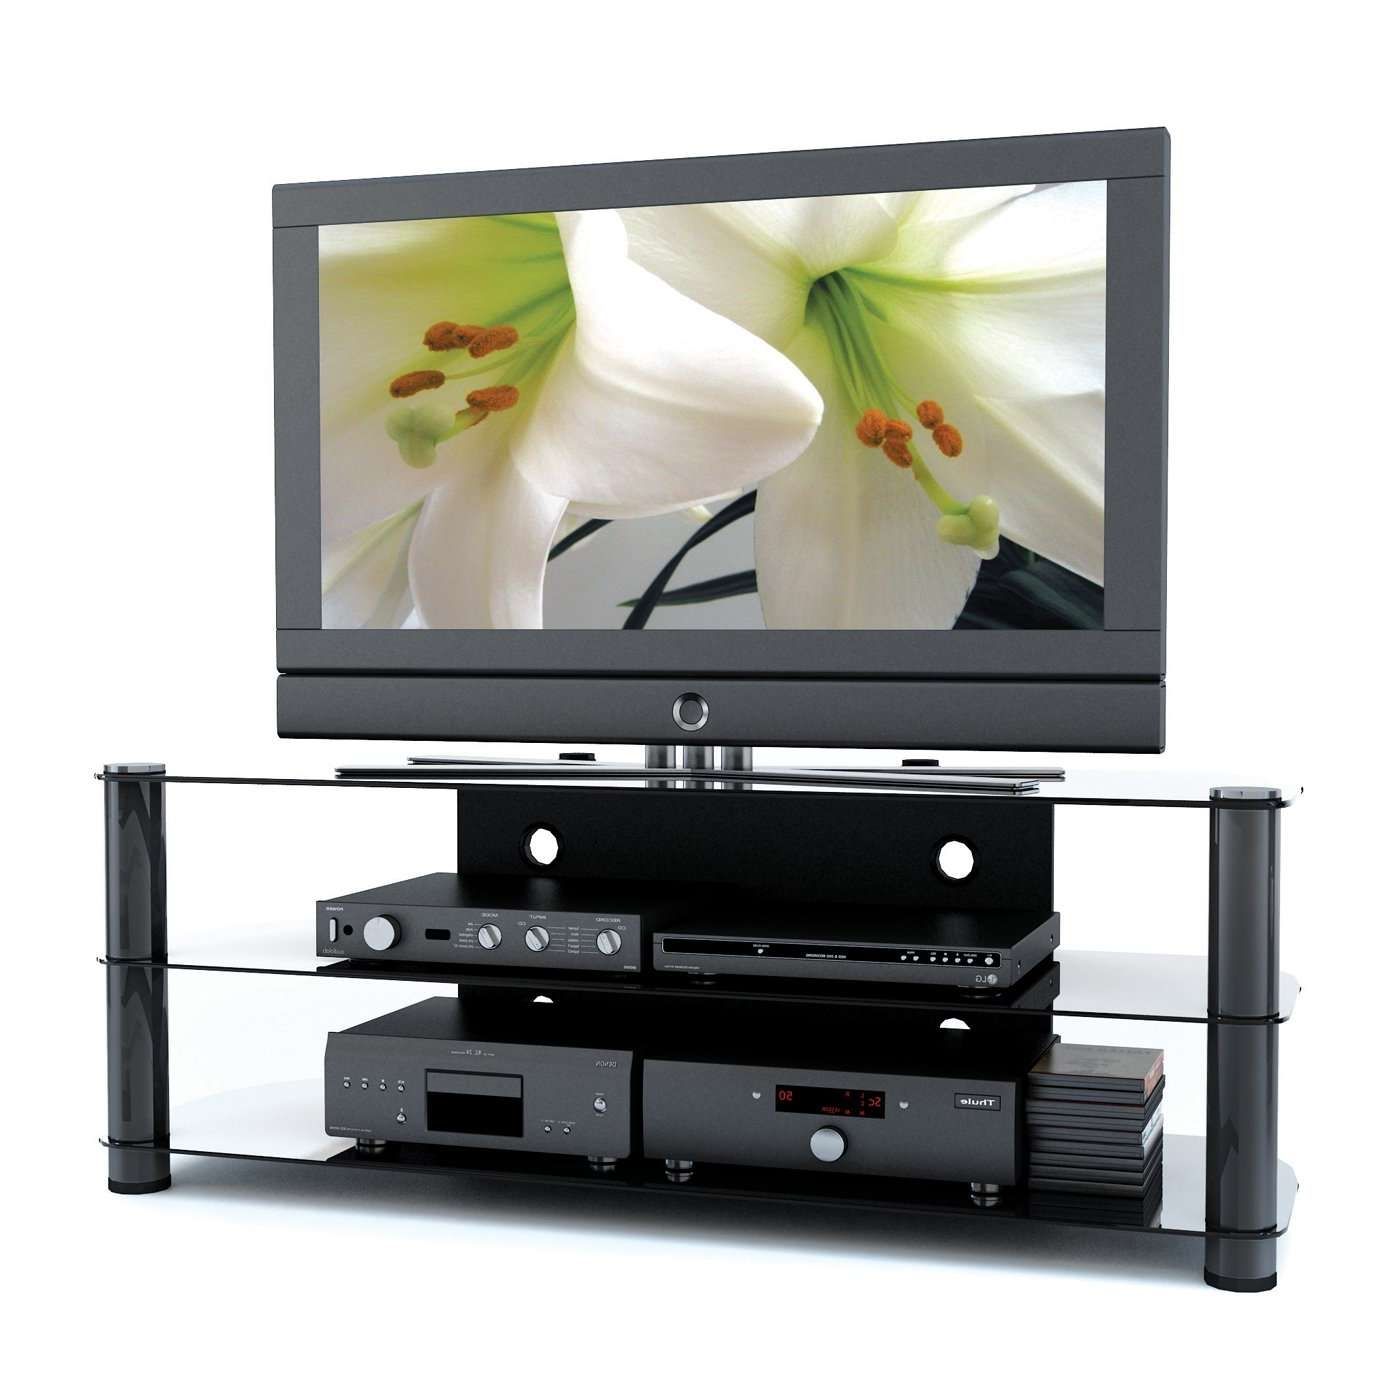 Corliving Ny 9584 New York Metal And Glass Tv Stand | Lowe's Canada Pertaining To Modern Glass Tv Stands (Gallery 13 of 15)